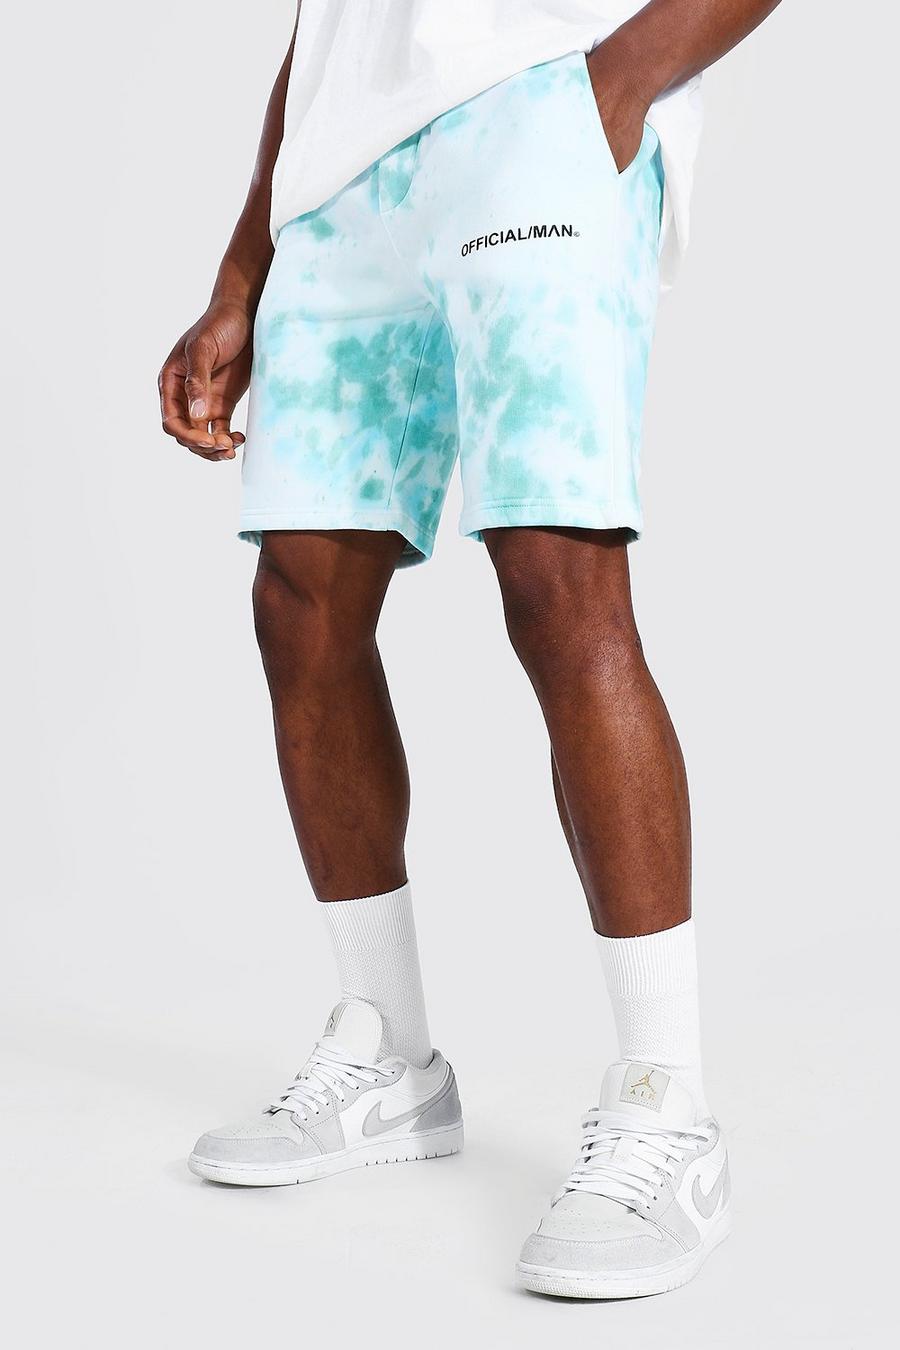 Green Man Official Tie Dye Regular Fit Jersey Shorts image number 1